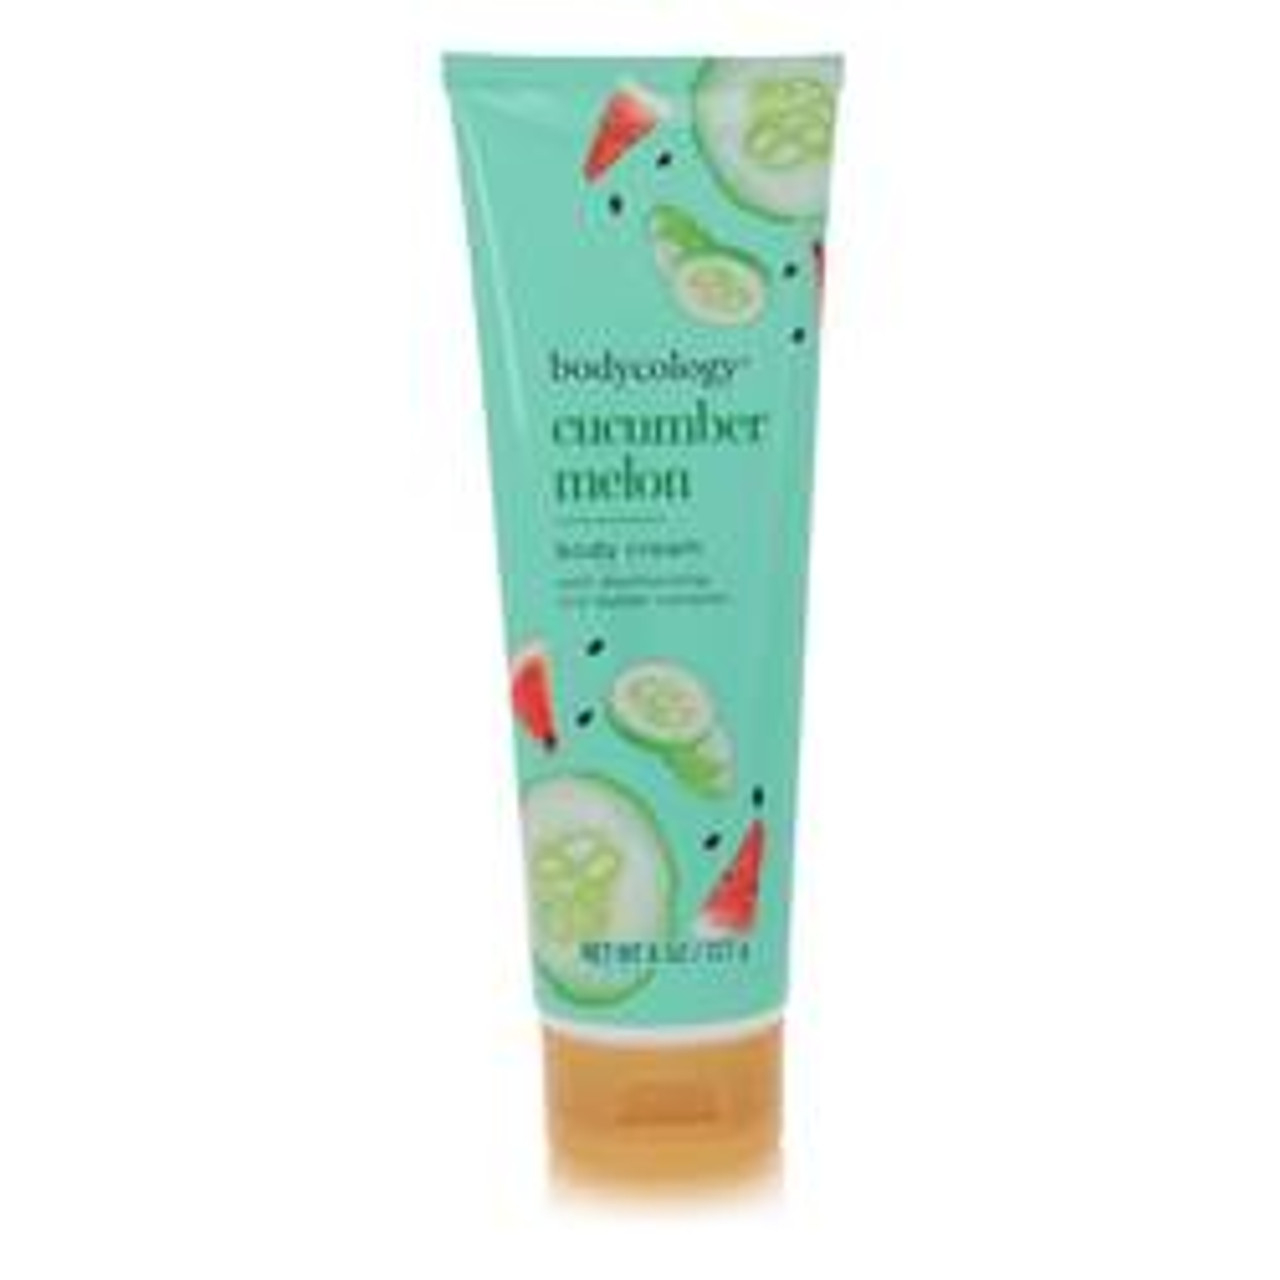 Bodycology Cucumber Melon Perfume By Bodycology Body Cream 8 oz for Women - *Pre-Order